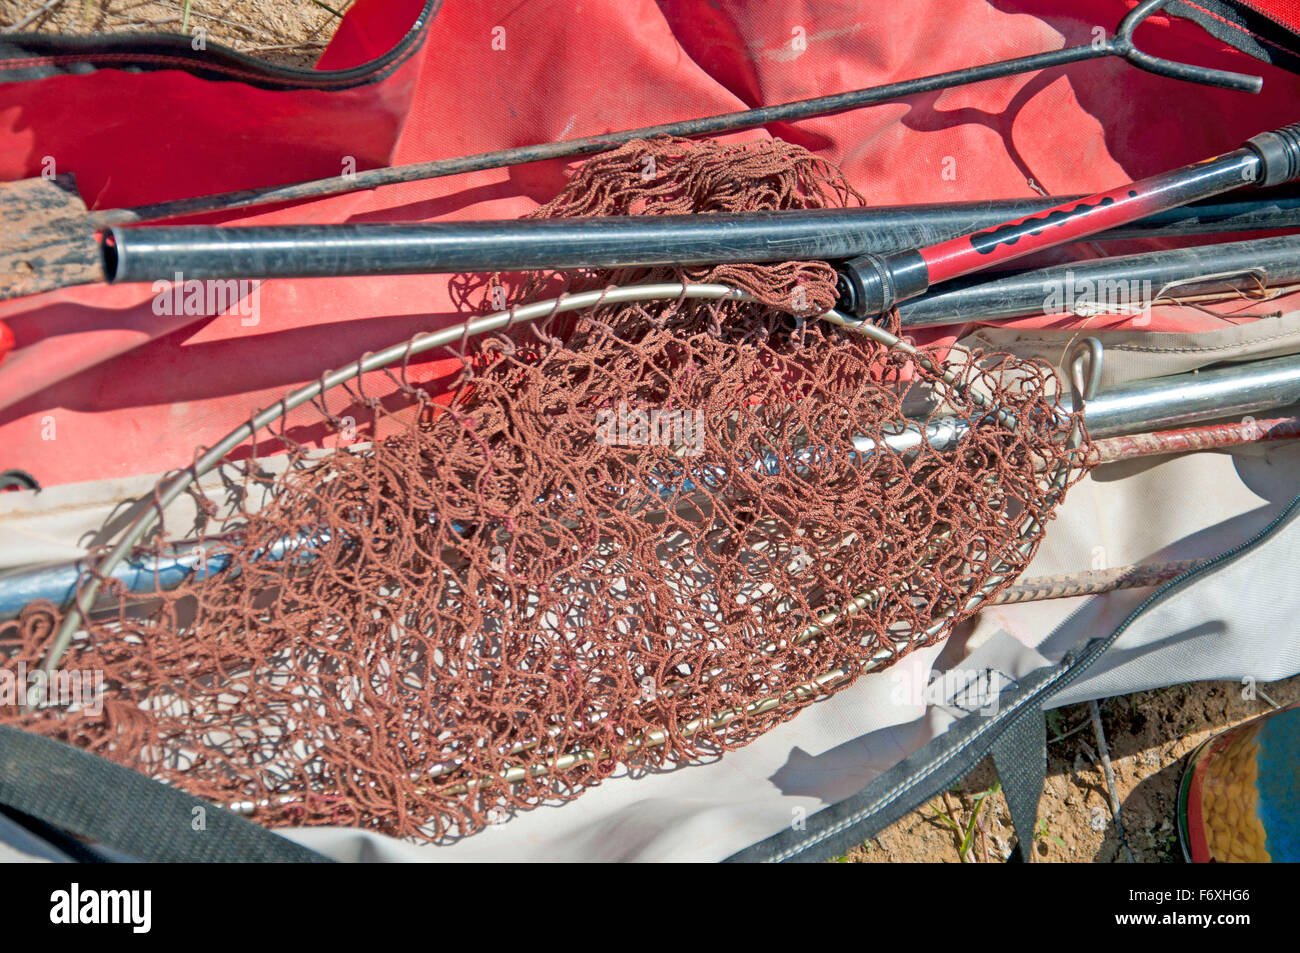 Set of fishing tools, such a net and a rod Stock Photo